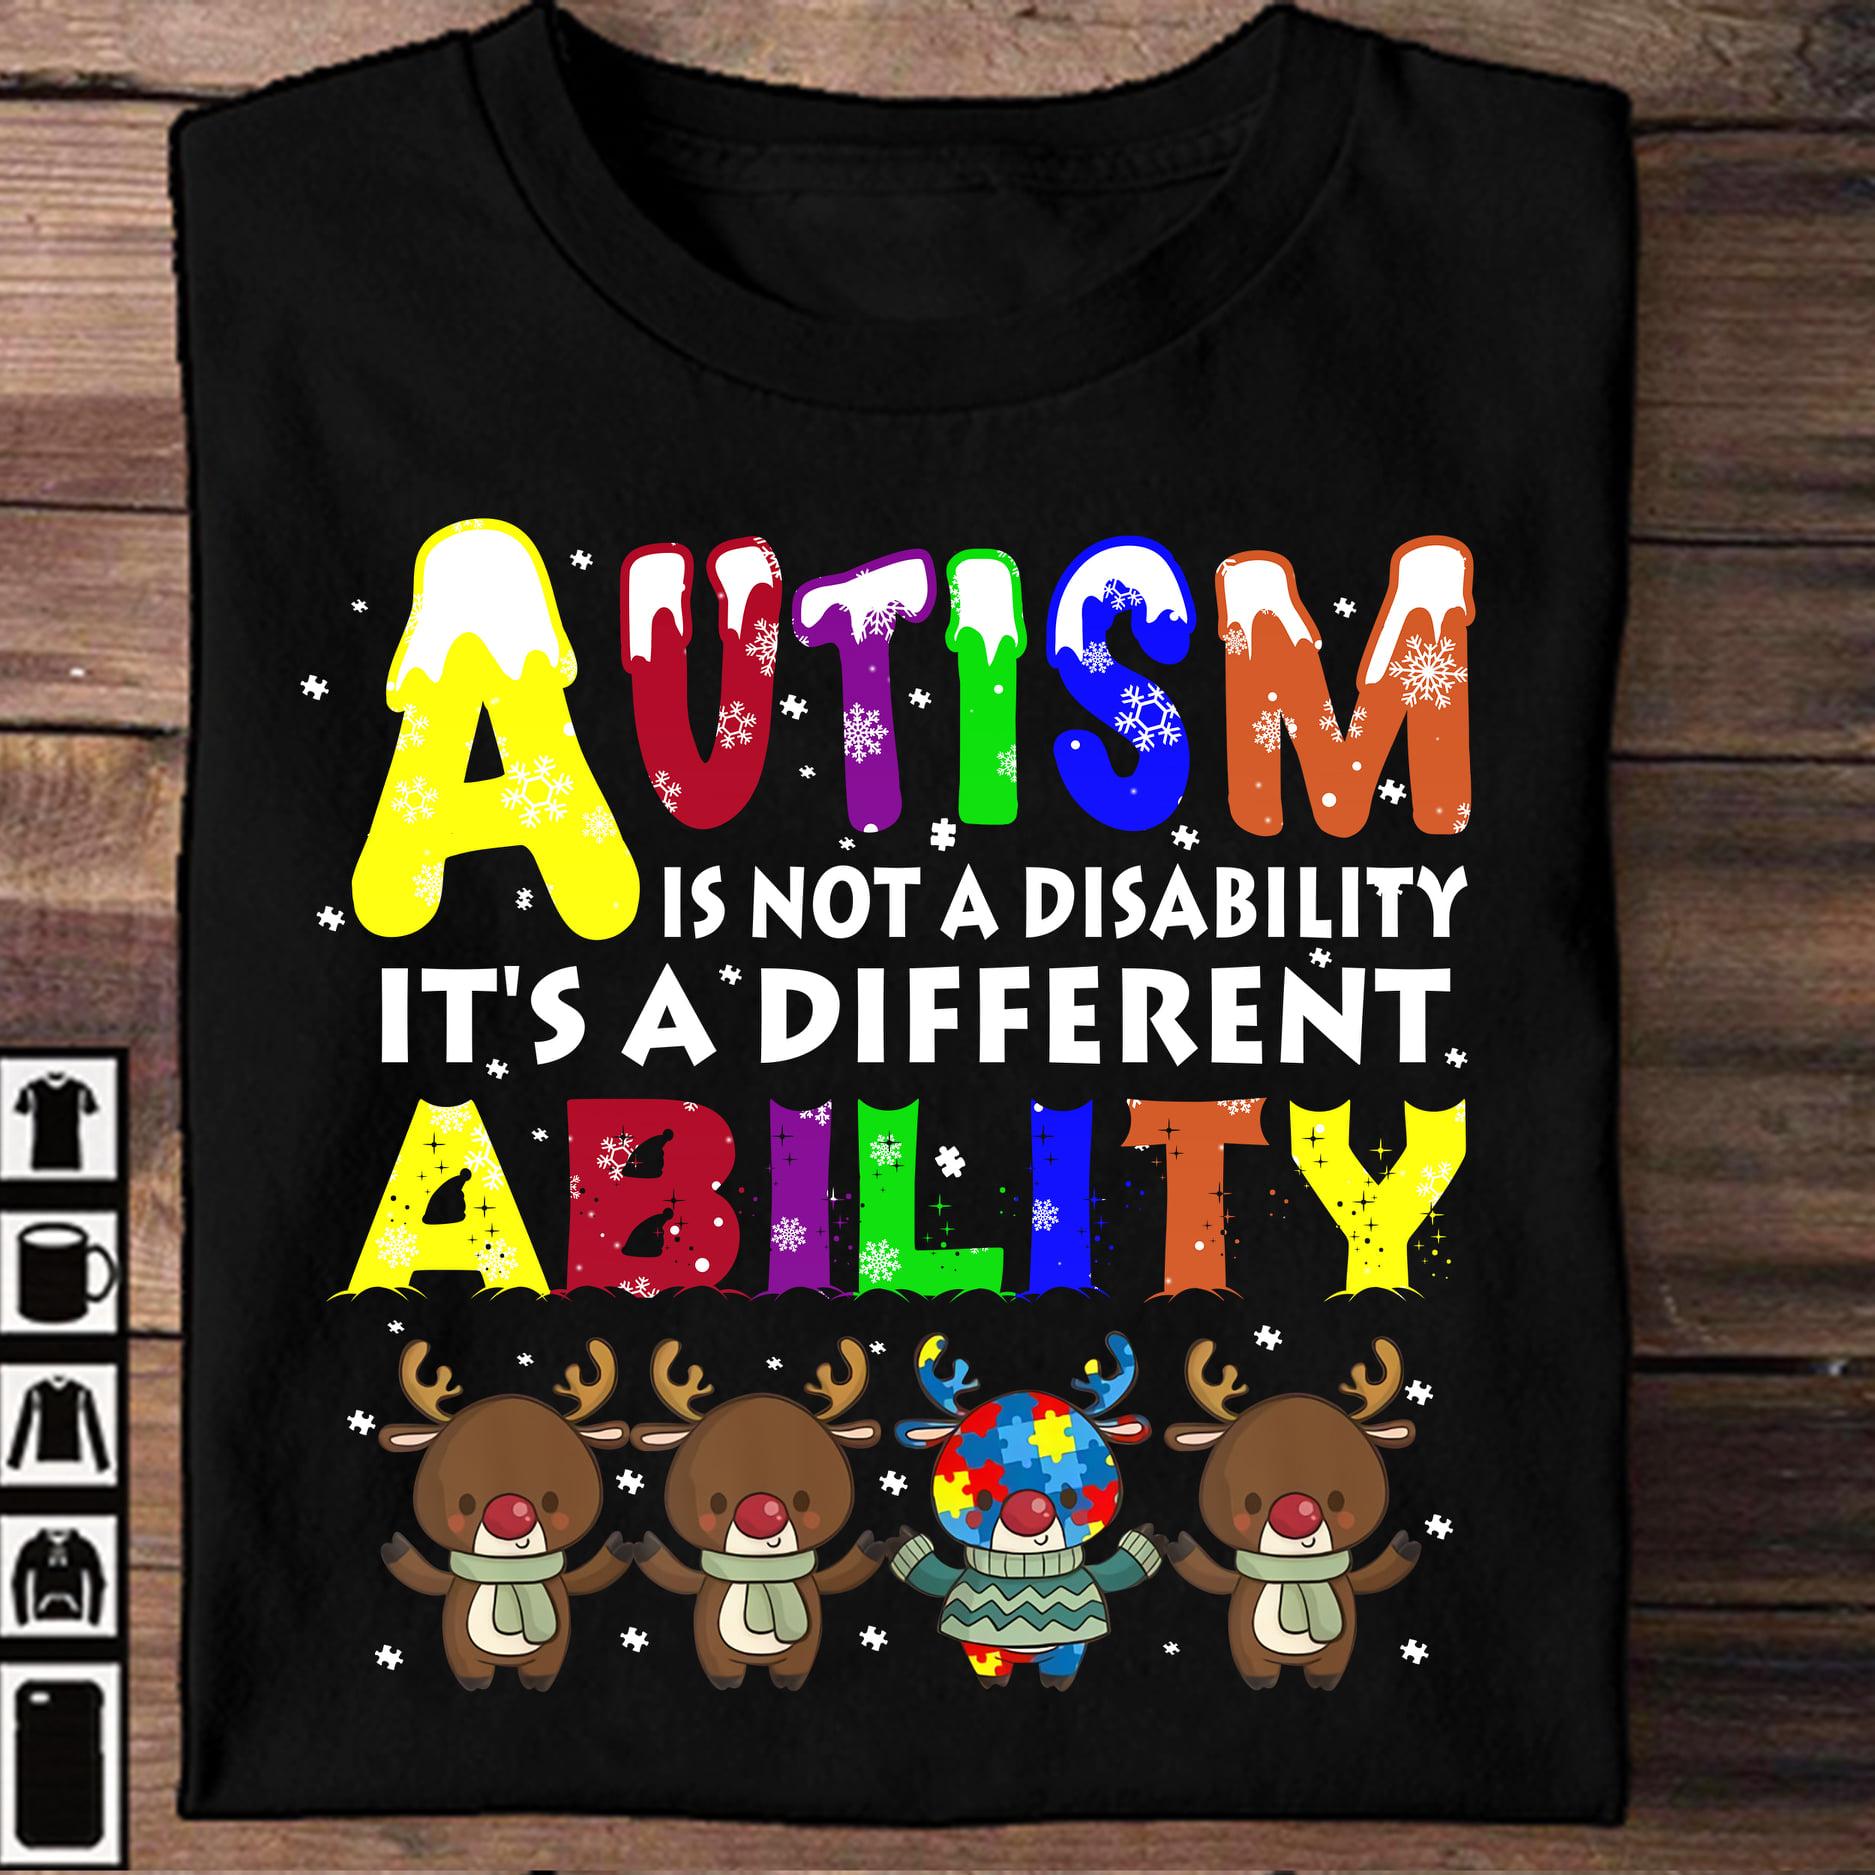 Autism is not a disablity it's a different ability - Autistic reindeer, Christmas day gift, autism awareness